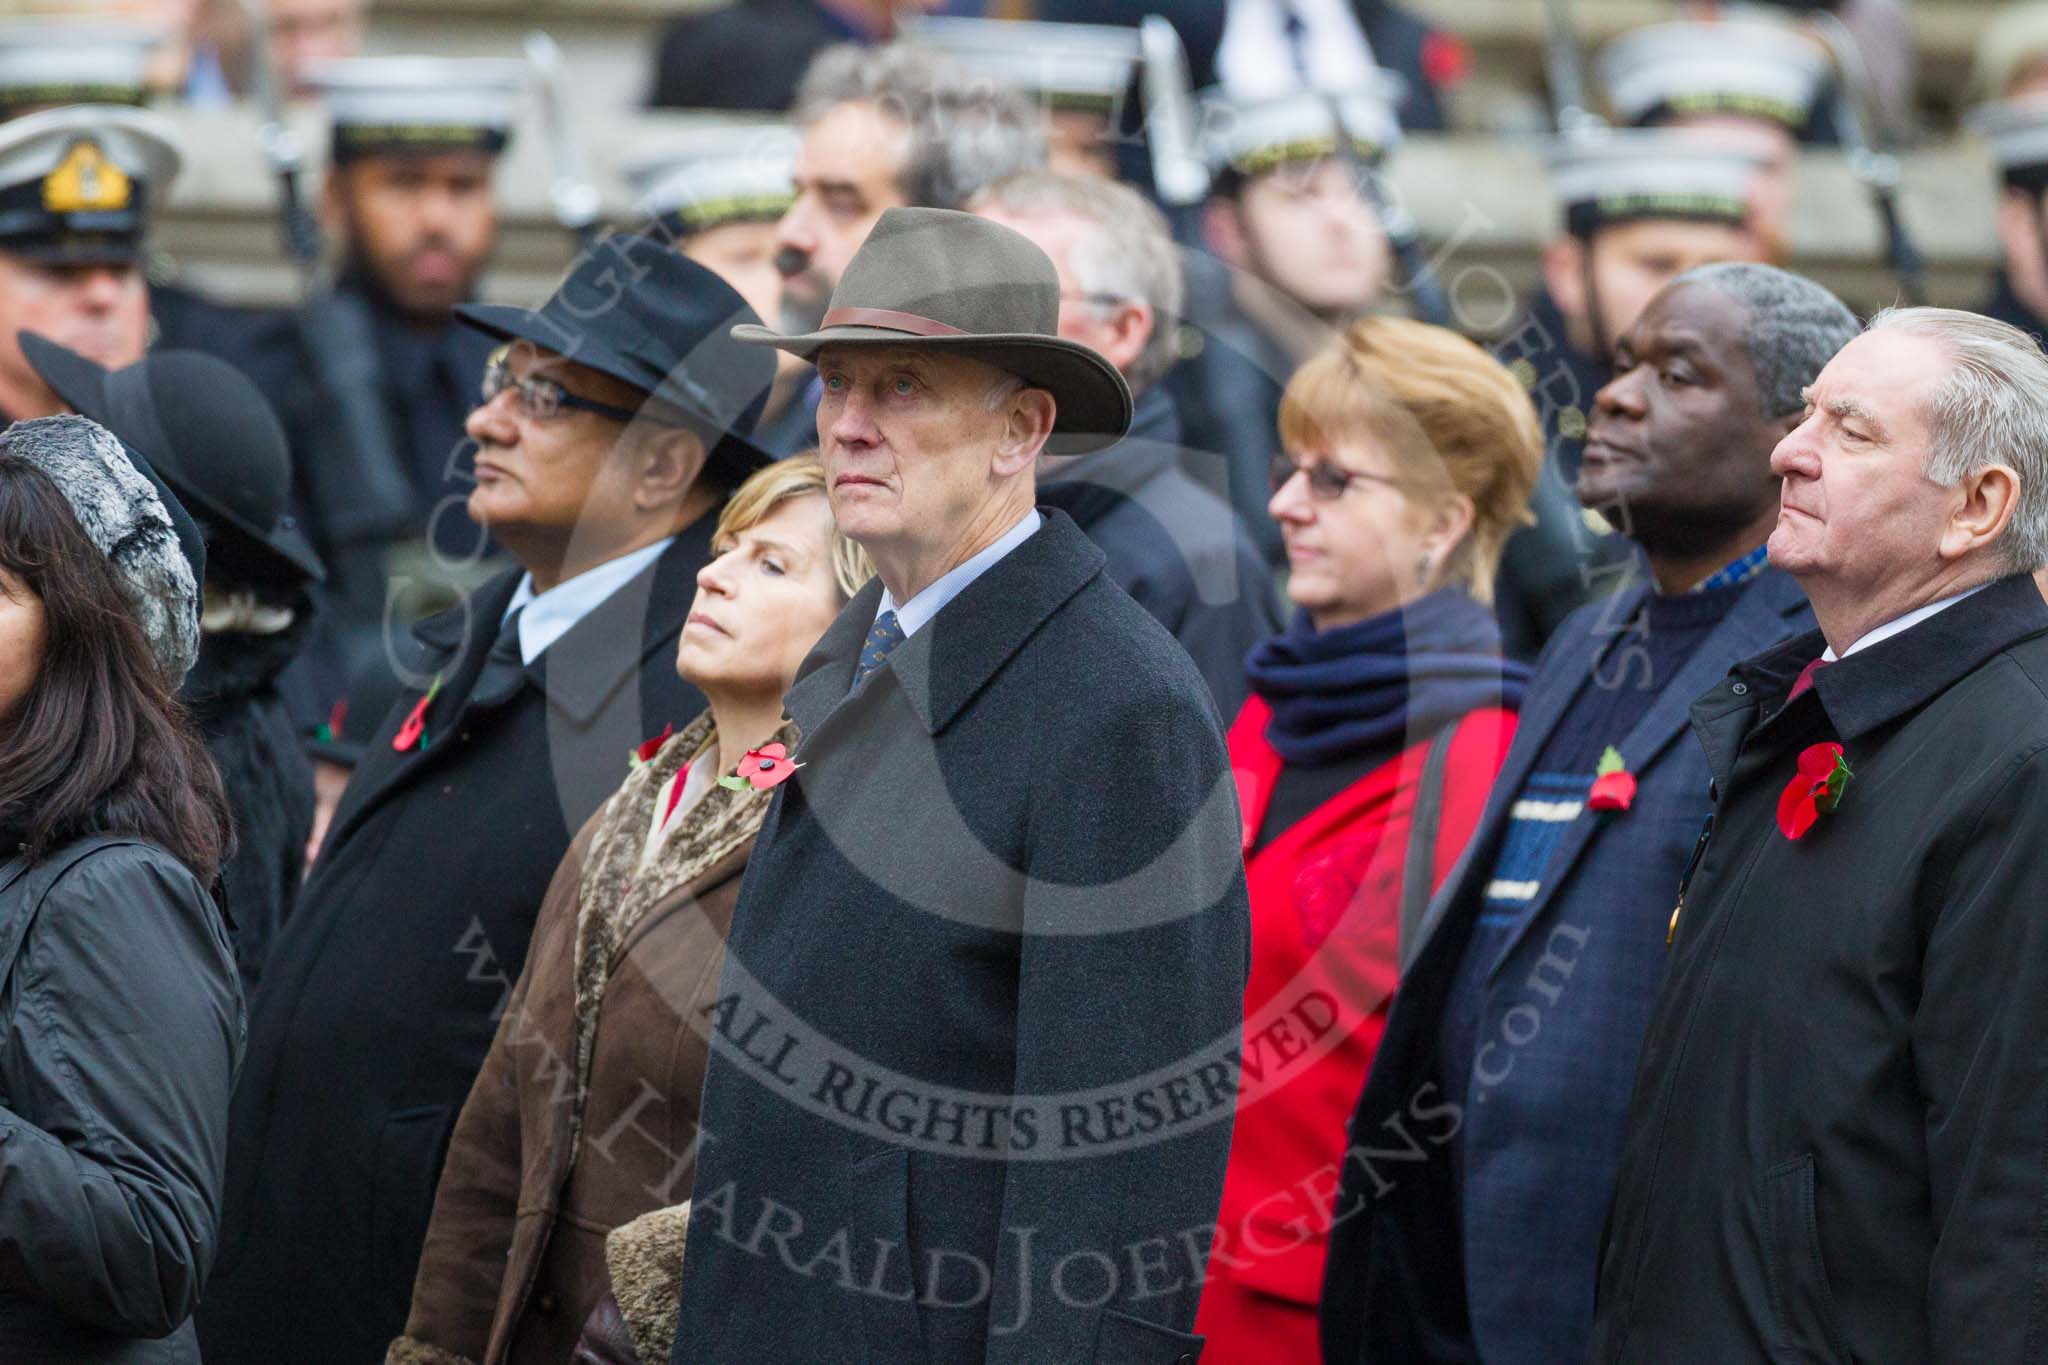 Remembrance Sunday at the Cenotaph 2015: Group M42, Rotary International.
Cenotaph, Whitehall, London SW1,
London,
Greater London,
United Kingdom,
on 08 November 2015 at 12:19, image #1680